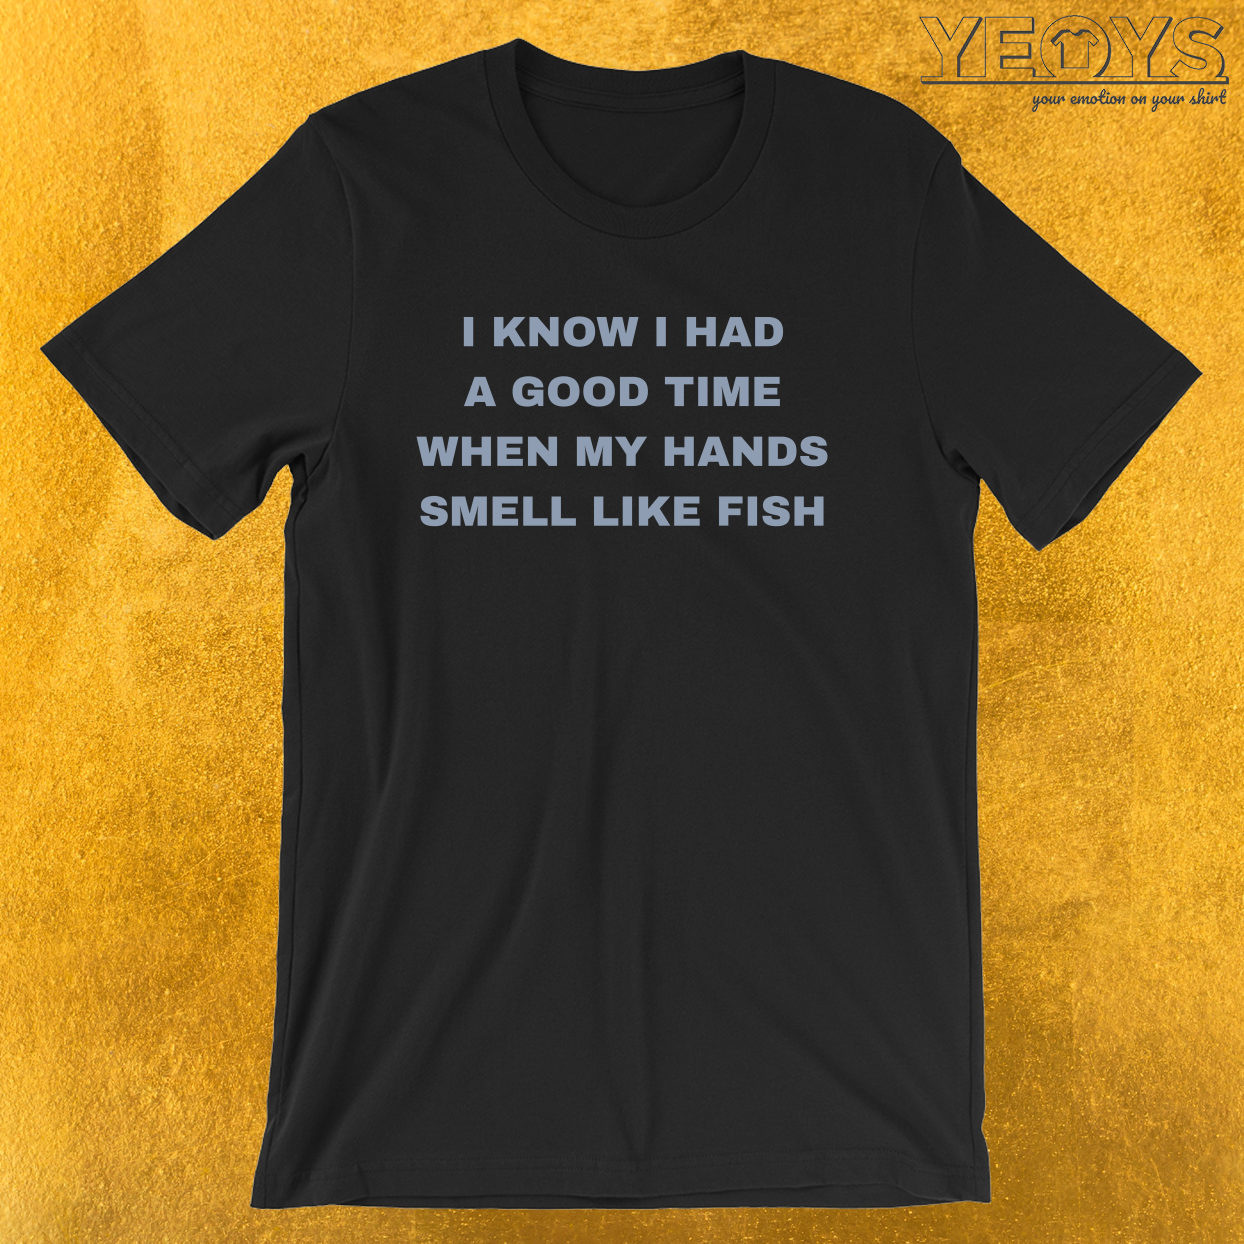 When My Hands Smell Like Fish – Funny Fishing Tee